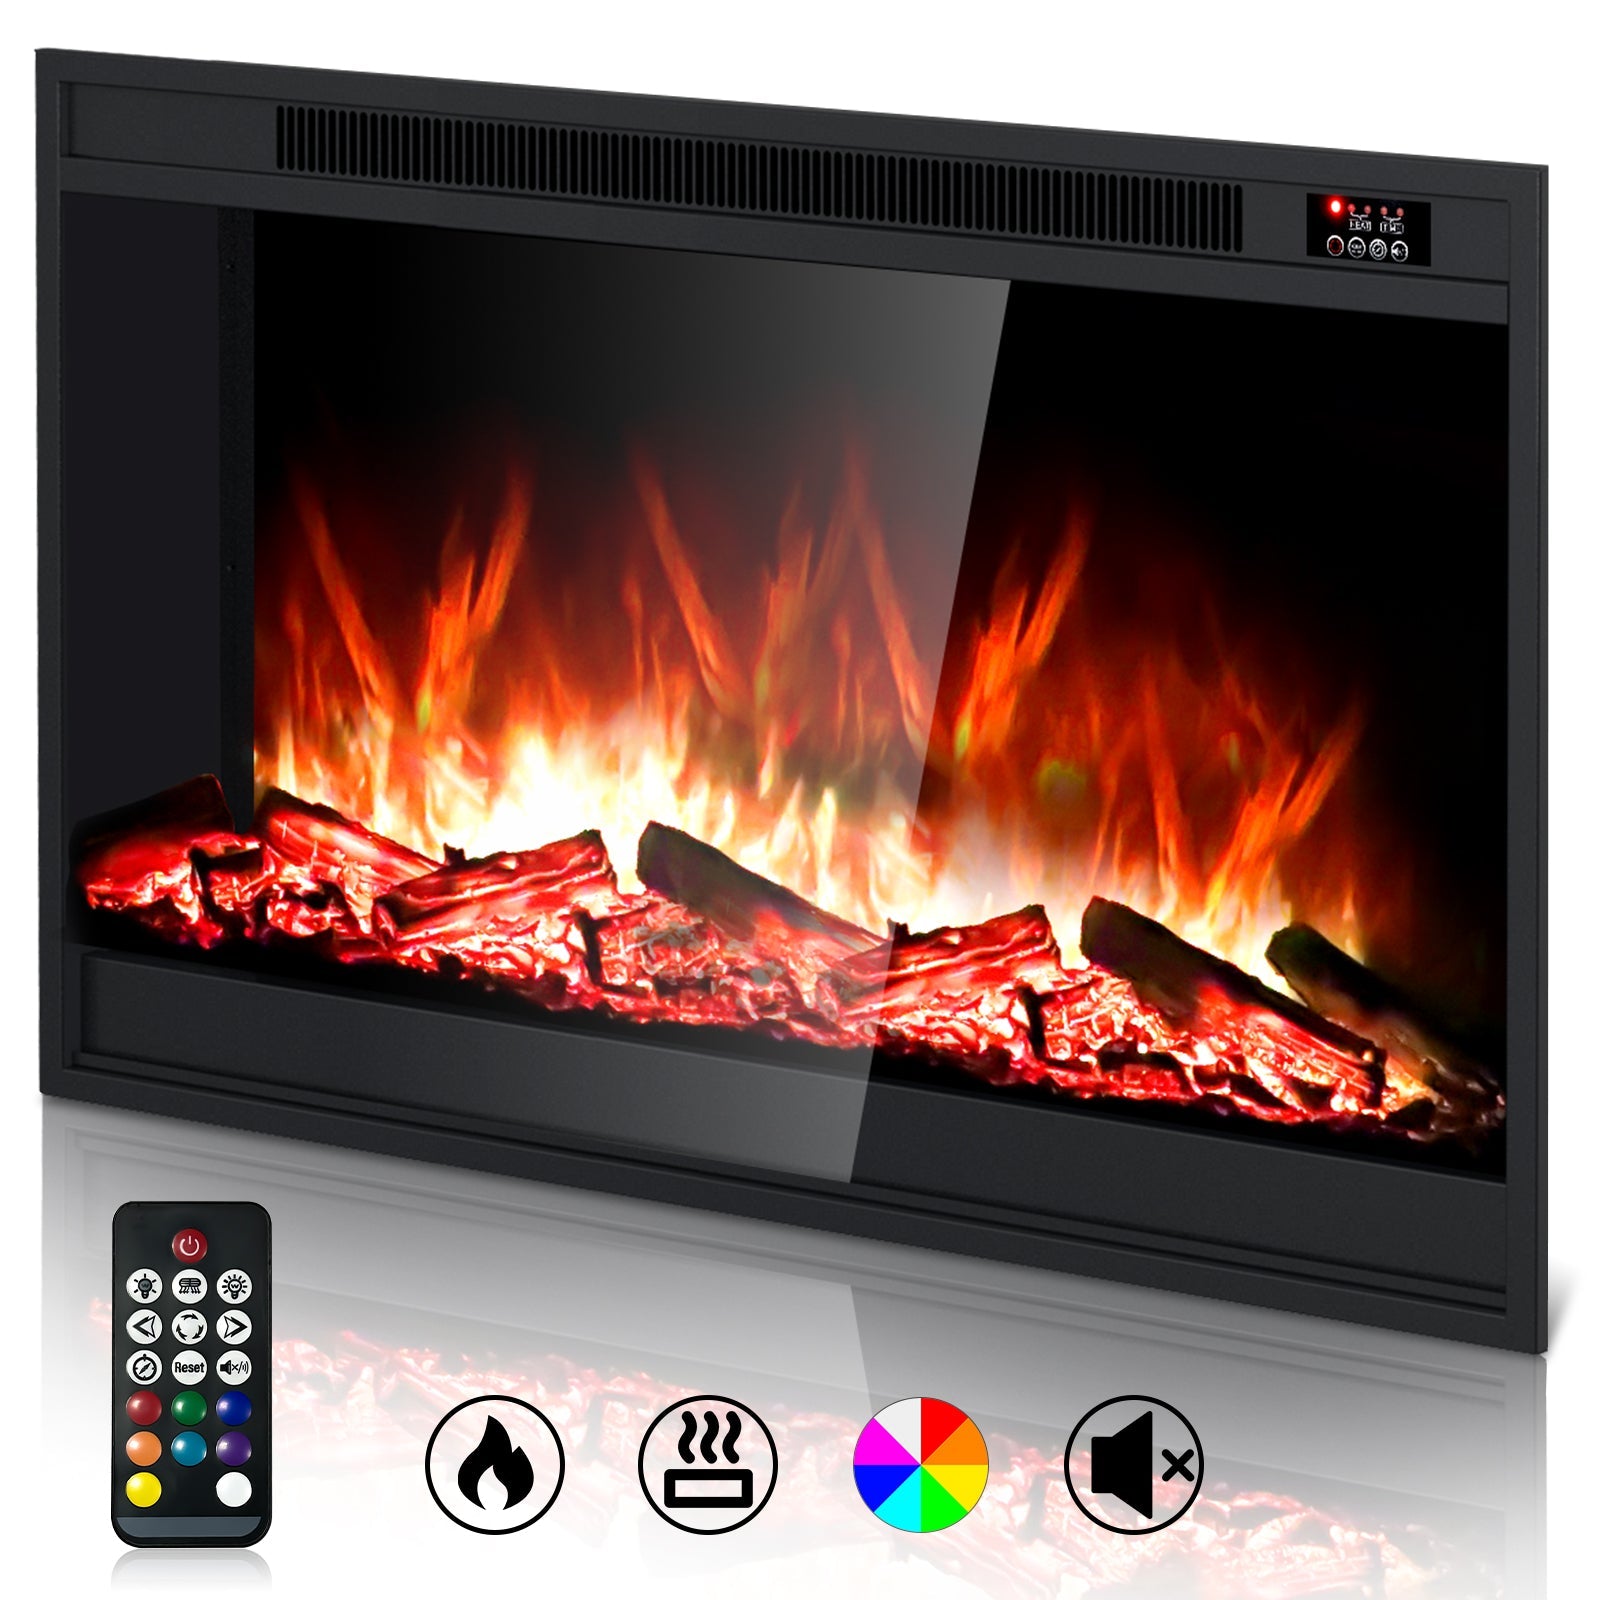 Electric Fireplace Inserts 33-inch Fire Place Eletric Fireplace Heater, Realistic LED Flame with Infrared Remote Control and Logs for Existing Living Space Room, Black